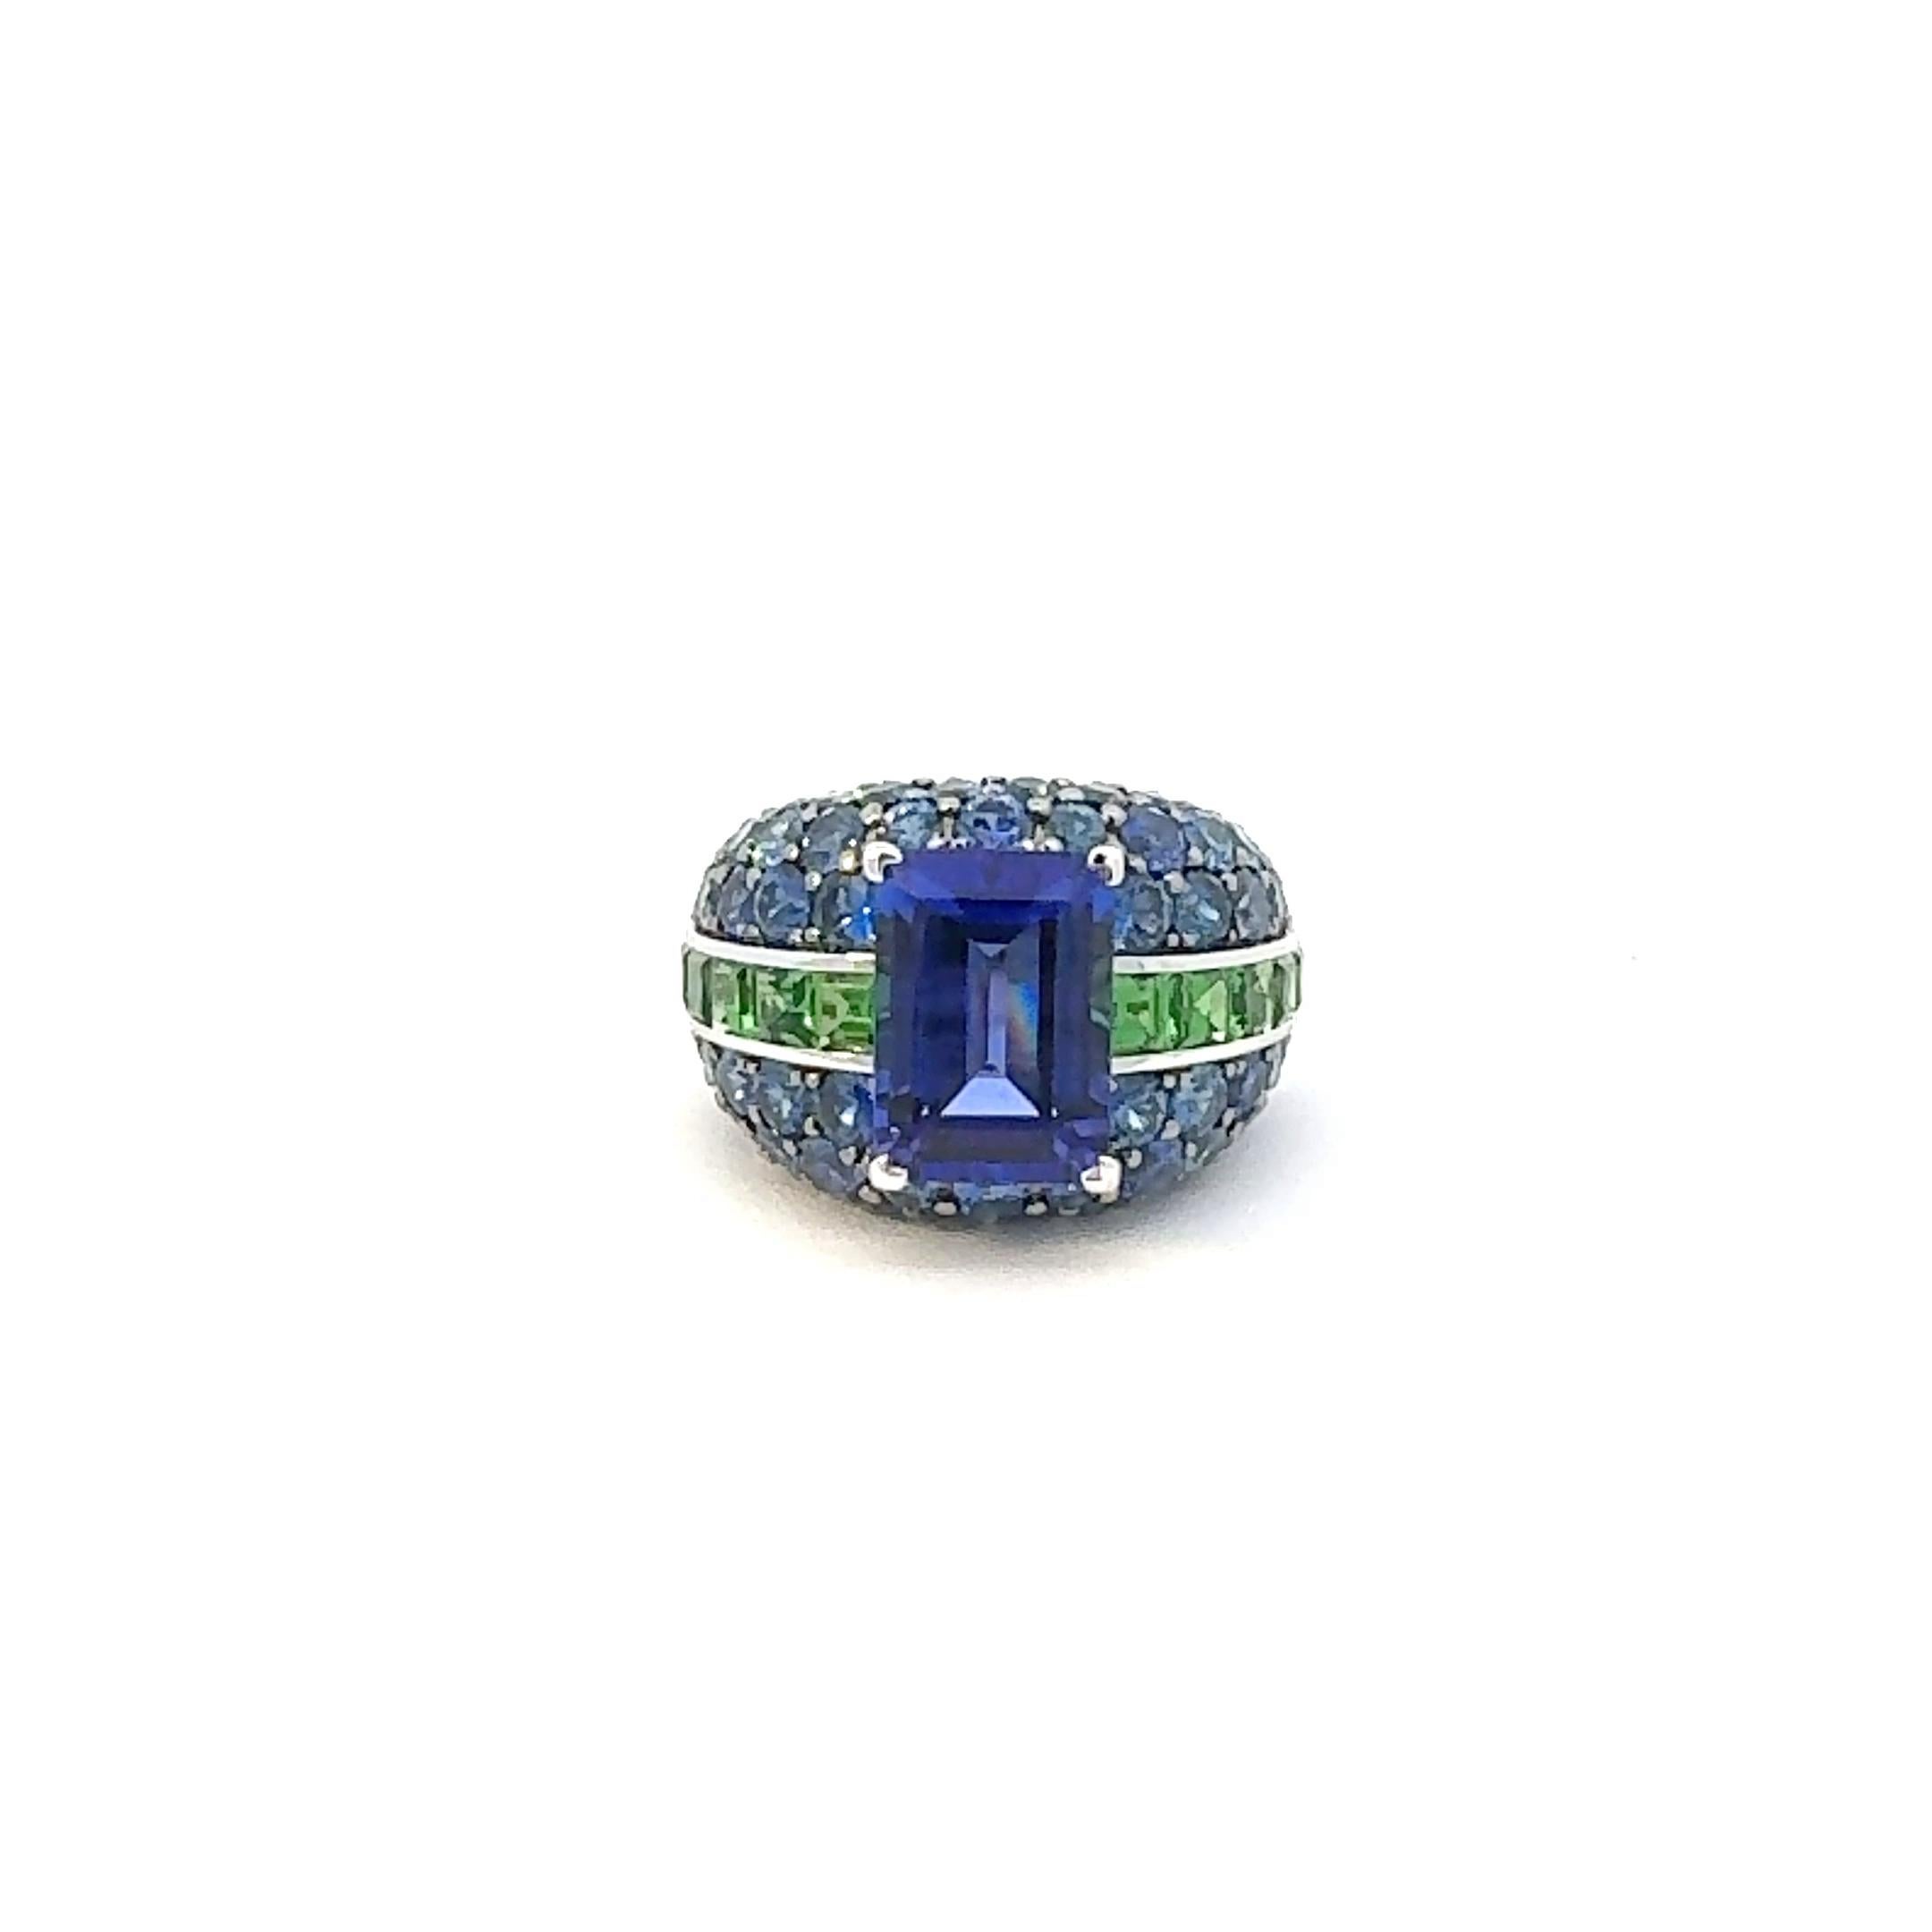 Posh Blue Sapphire Tanzanite 18K White Gold Ring For Her For Sale 1